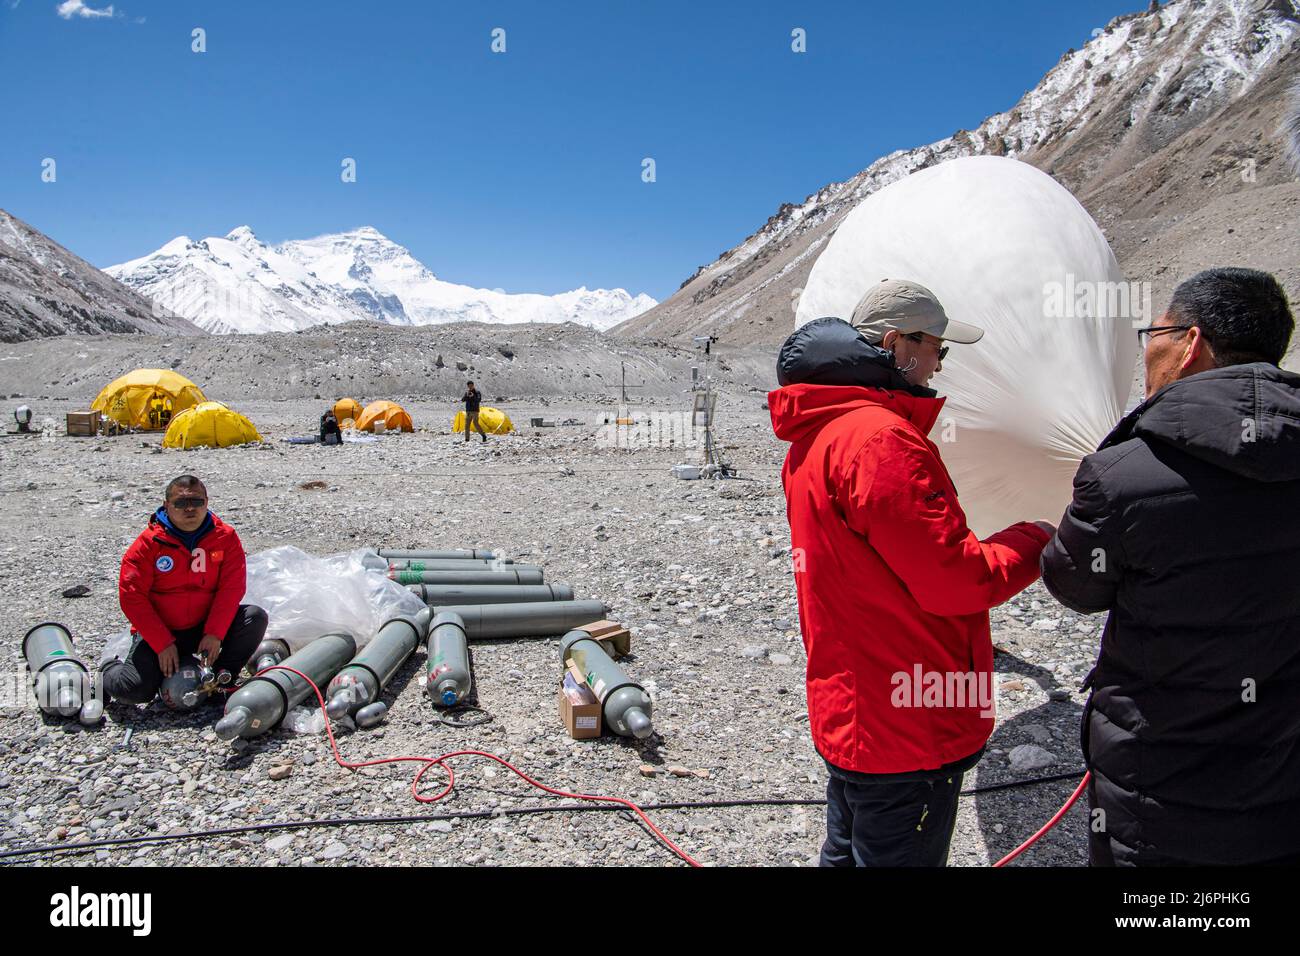 MOUNT QOMOLANGMA BASE CAMP, May 3, 2022 (Xinhua) -- Scientific research members inflate a weather balloon at the Mount Qomolangma base camp on May 3, 2022.  China has started a new comprehensive scientific expedition on Mount Qomolangma, the world's highest peak on the China-Nepal border.   Weather factors such as temperature, wind speed and humidity will directly affect the completion of scientific research tasks and the safety of research personnel at high altitude. Therefore, a meteorological support team has been launched in safeguards of the scientific expedition.   The team i Stock Photo